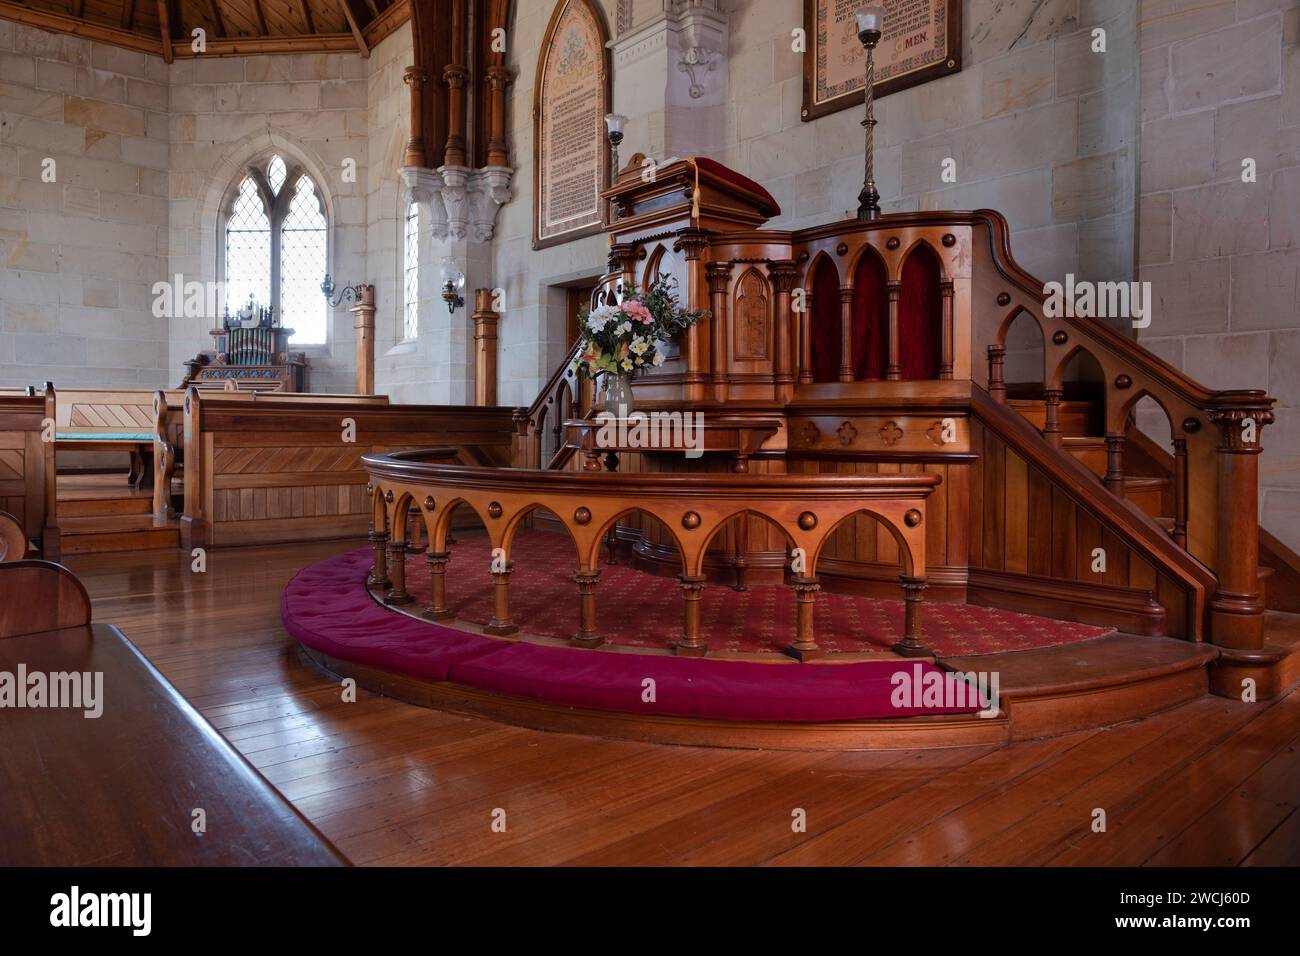 Interior of the Gothic style stone Uniting Church (The Methodist Church) in Ross, Australia Stock Photo